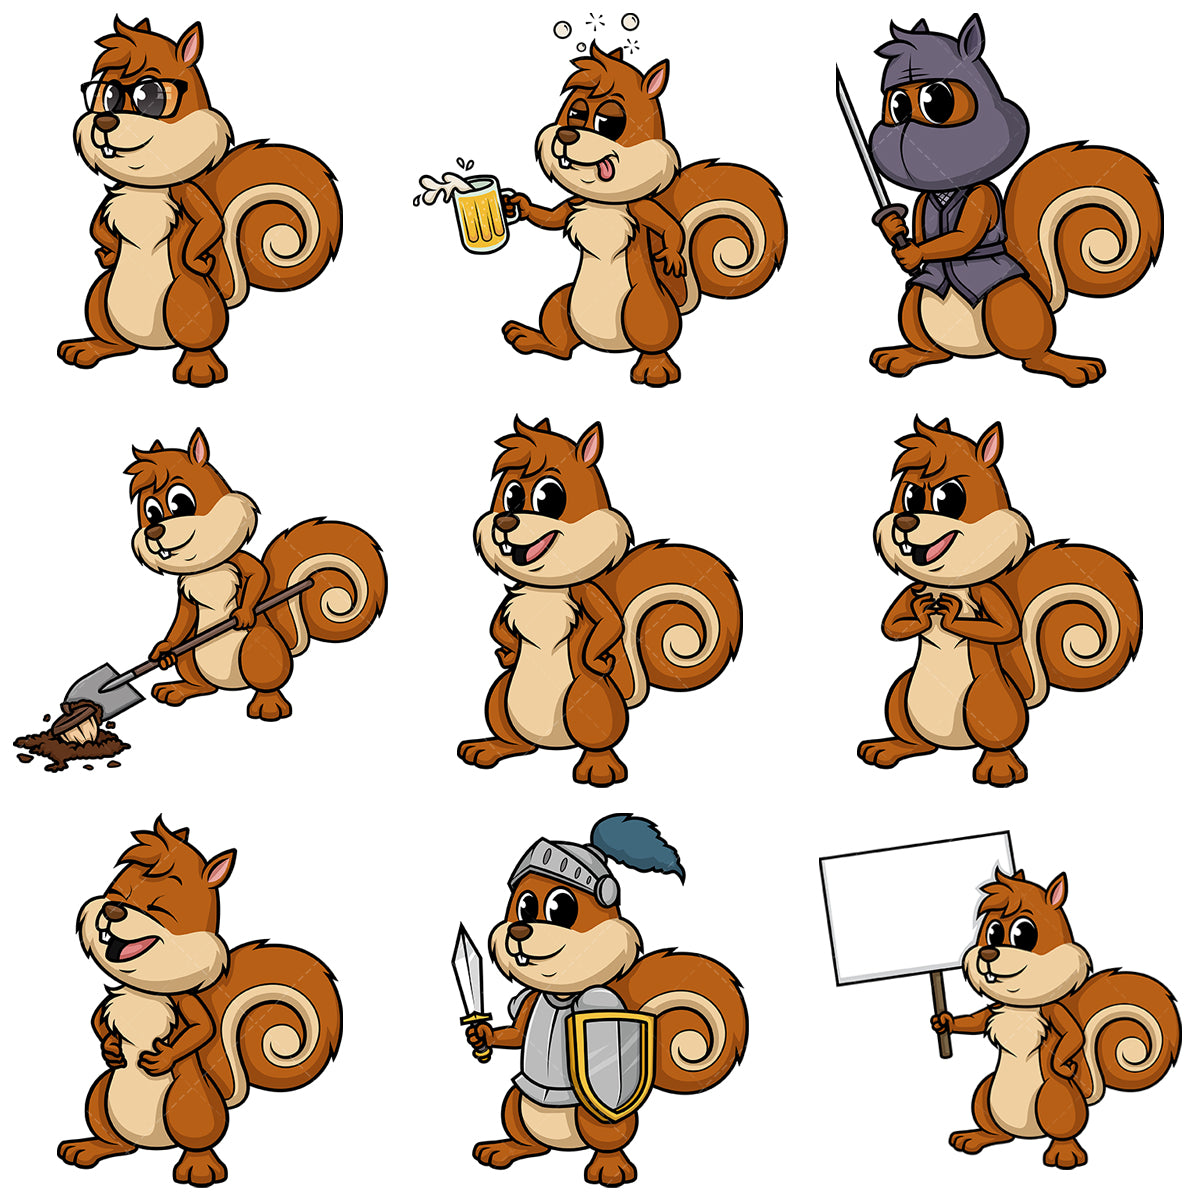 A bundle of 9 royalty-free stock vector illustrations of a squirrel character.